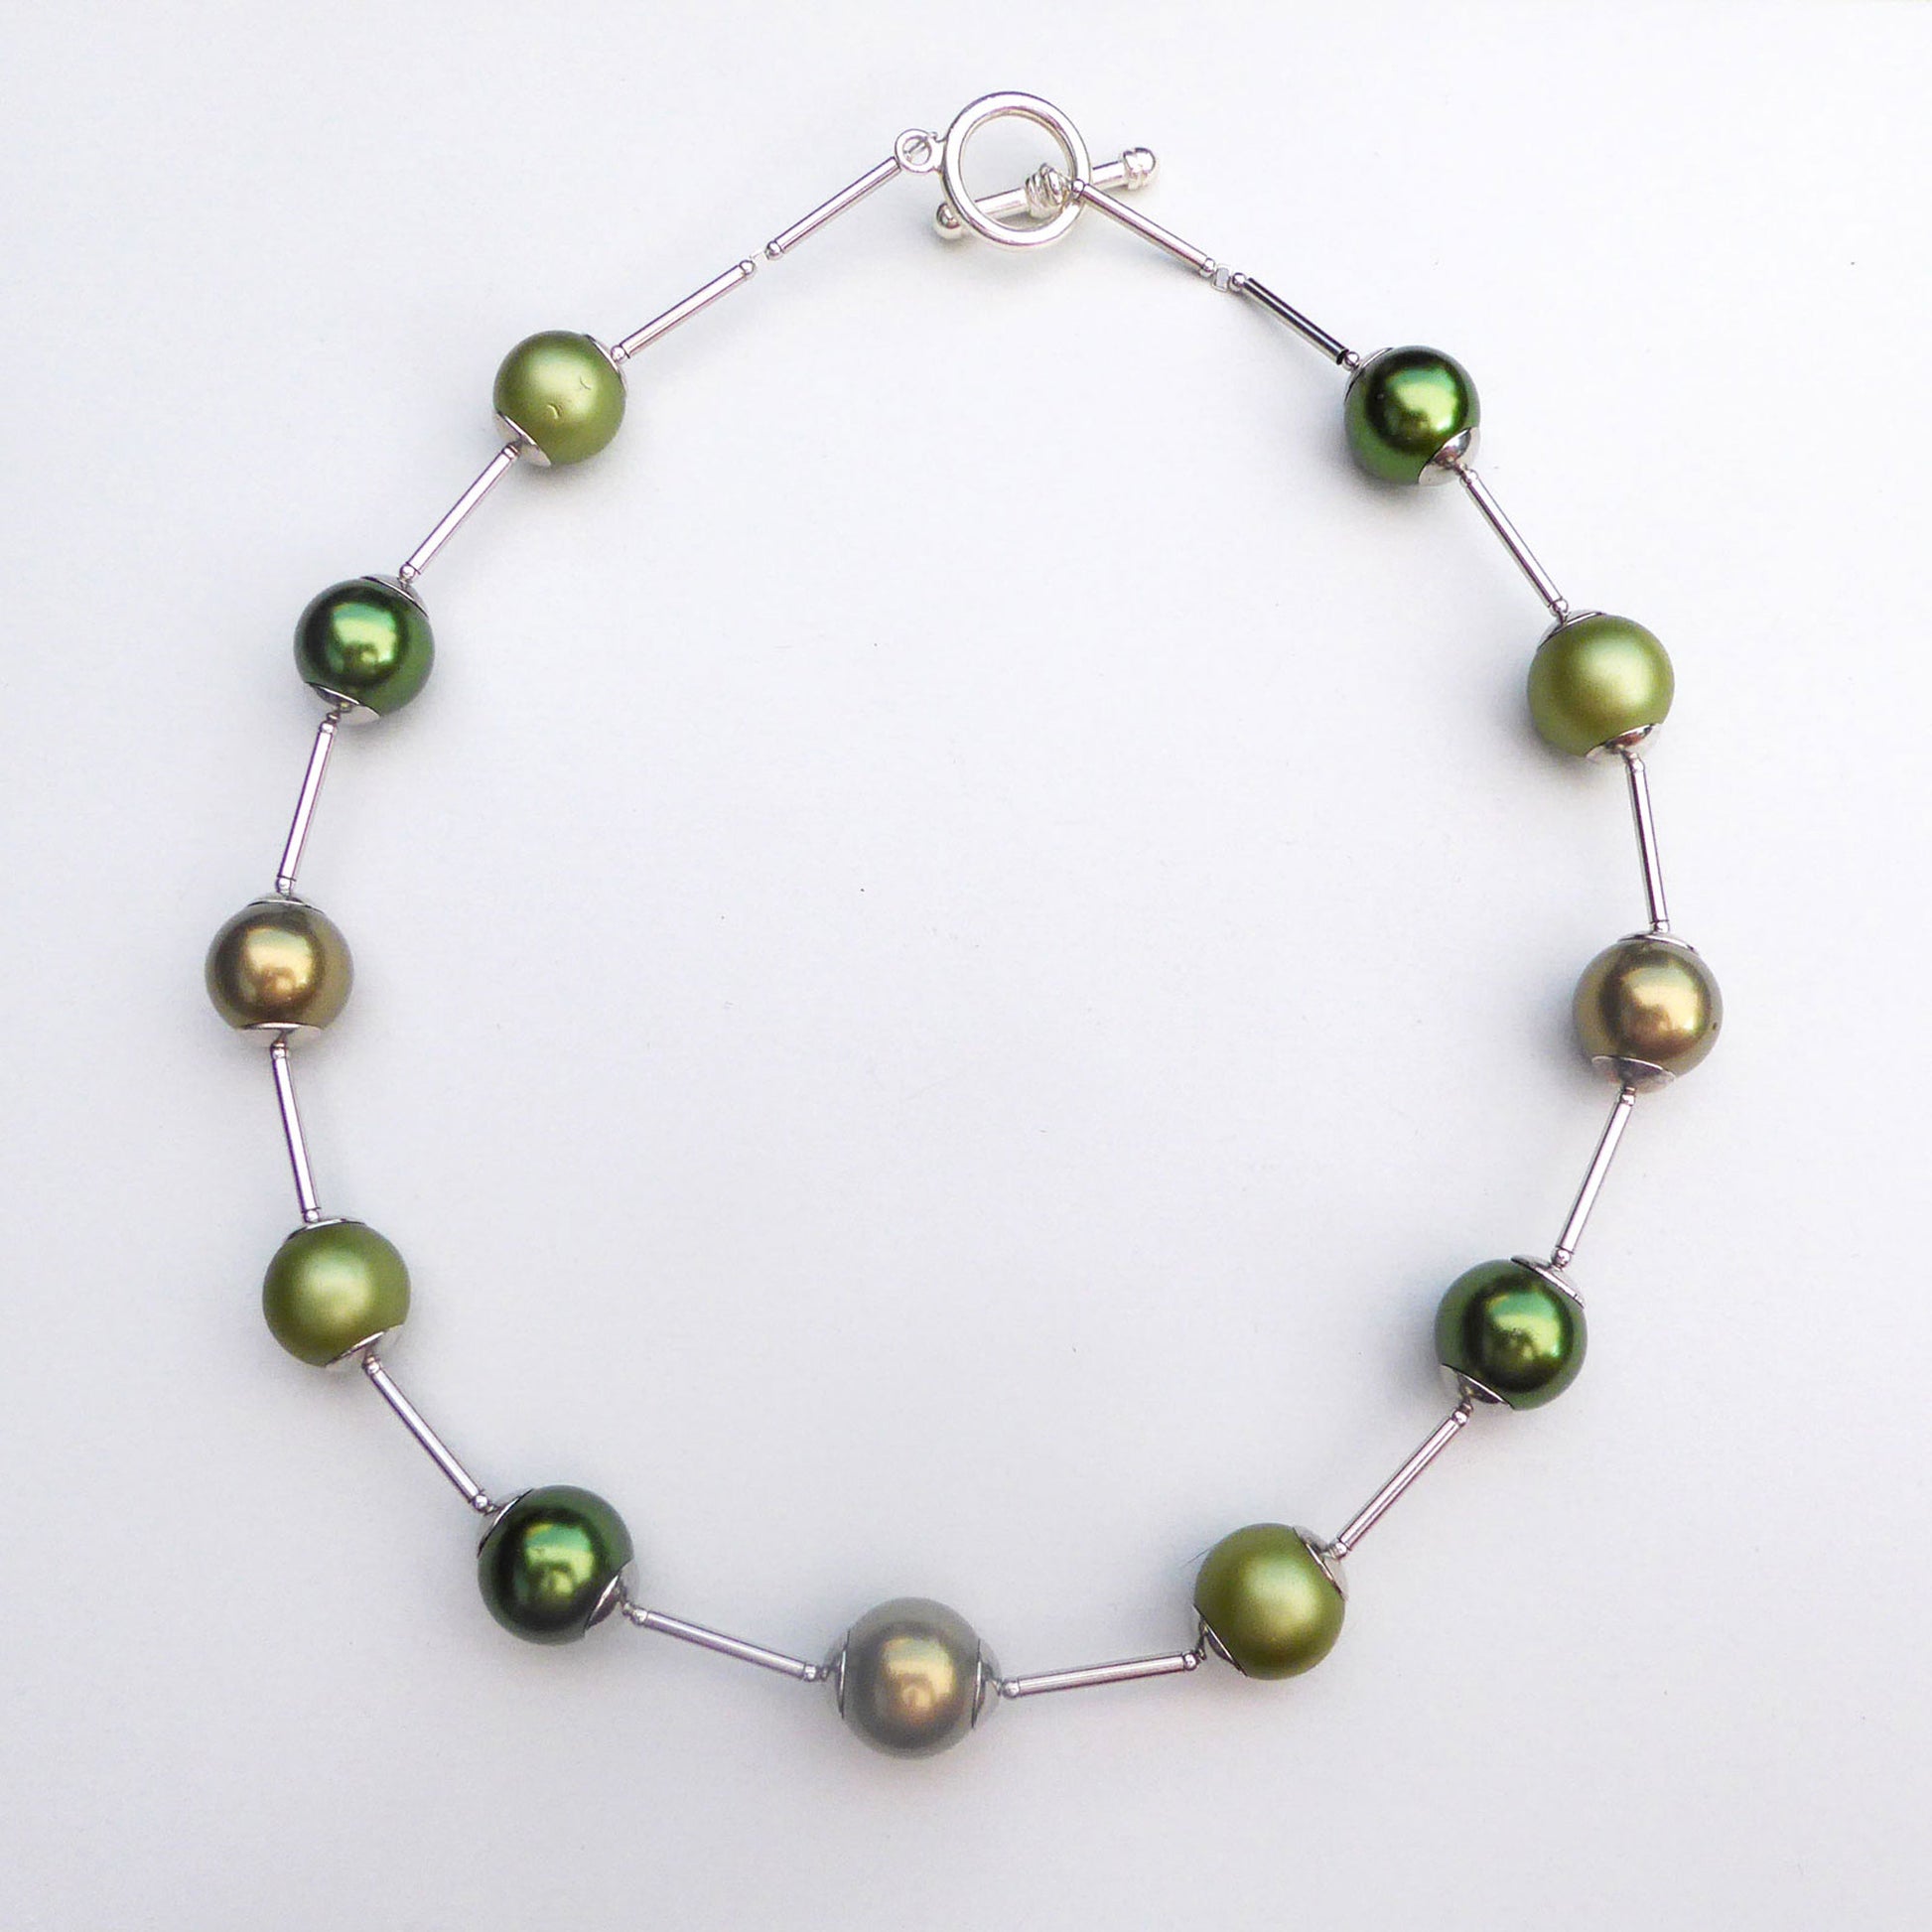 Glass pearl orb-style necklace in shades of green